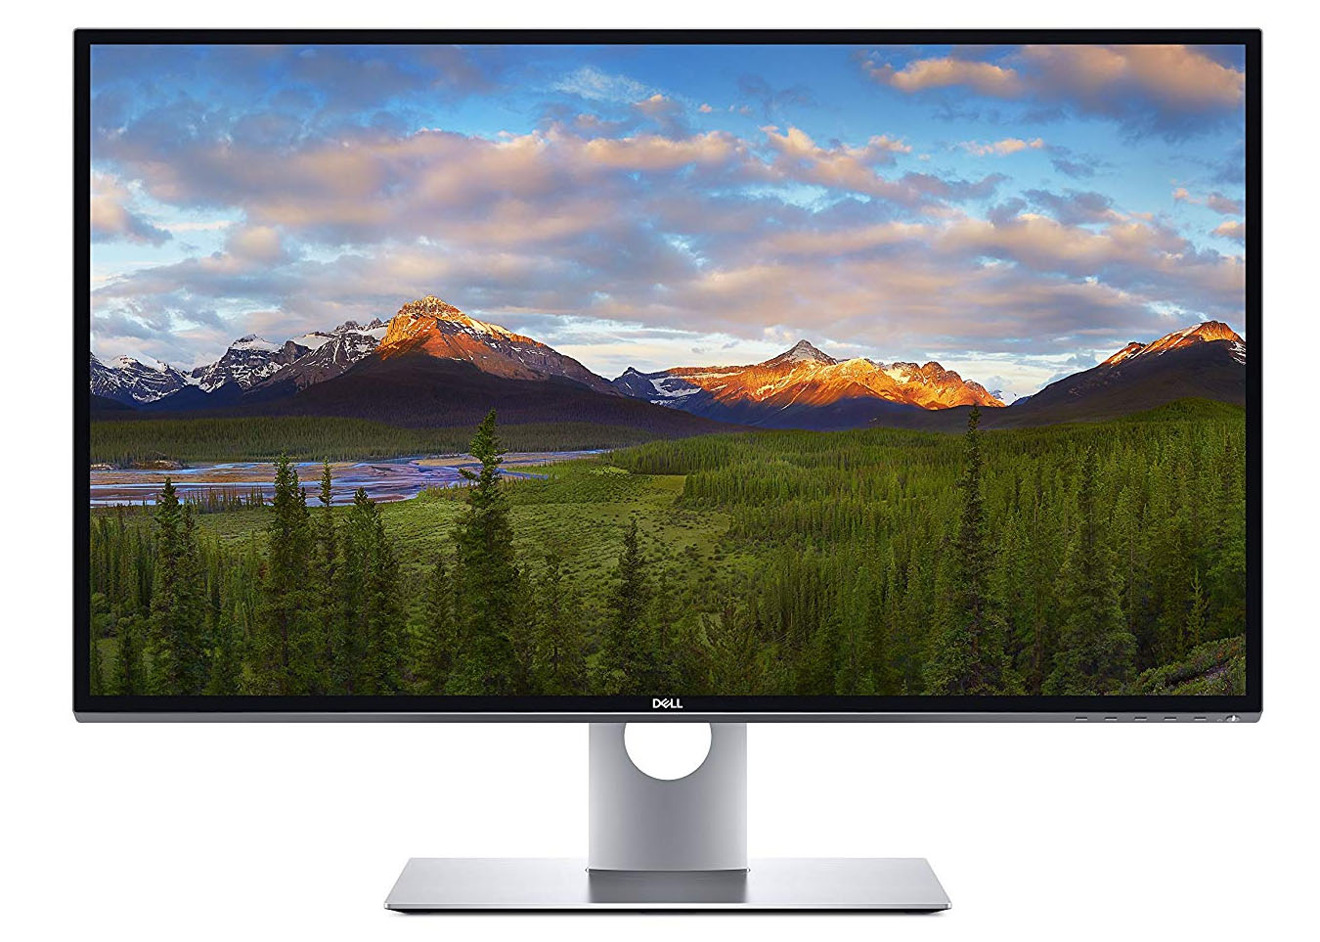 Monitor Roundup: The best alternatives to Apple's Pro Display XDR |  AppleInsider